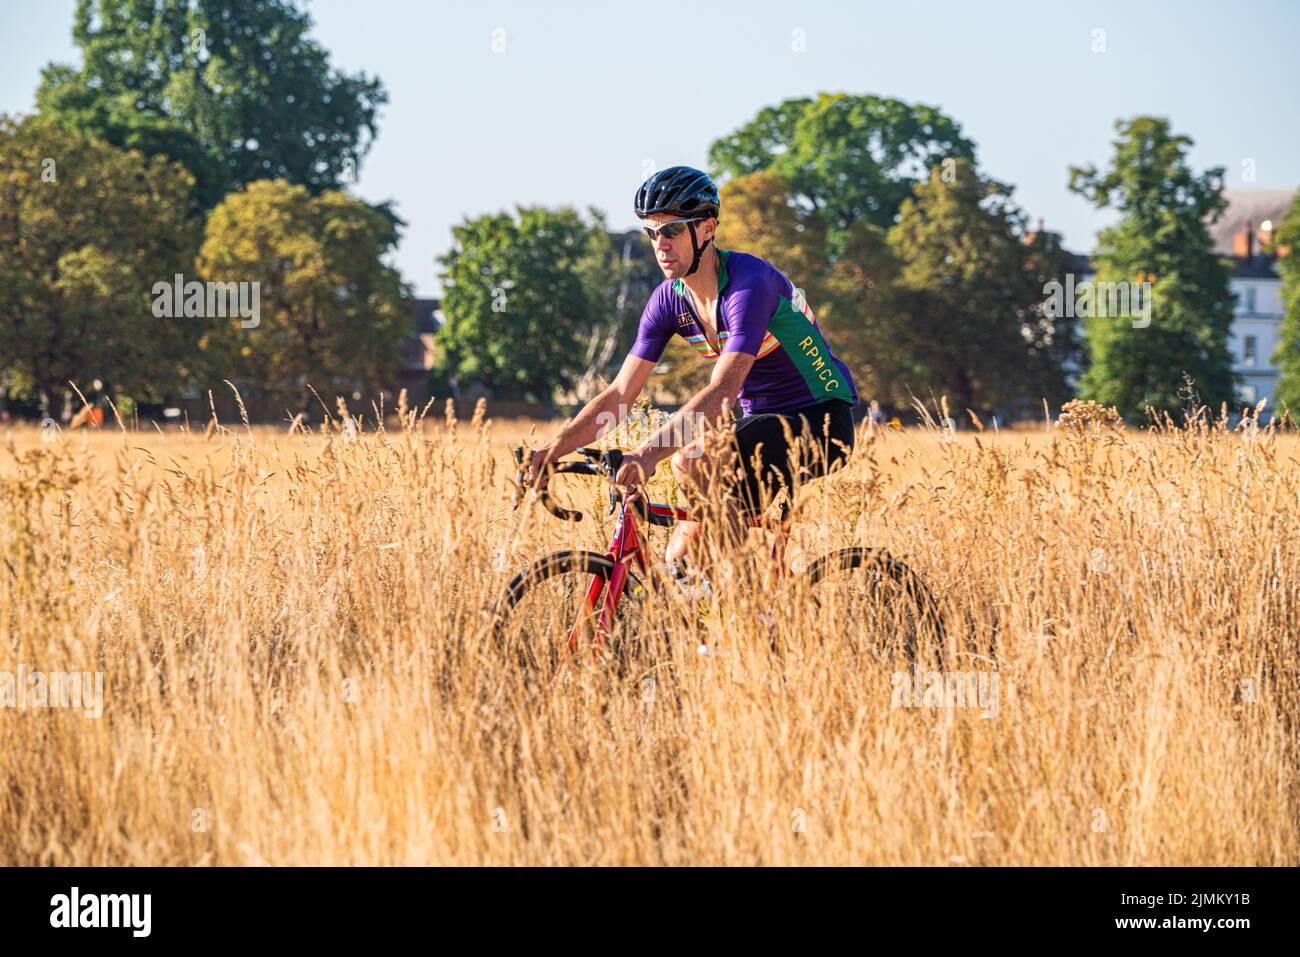 Wimbledon, London, UK. 7 August 2022  A cyclist riding  in the bright sunshine this morning through the parched Wimbledon Common, south wst London as the hot weather and a lack of rainfall continue to grip much of the south of England and the UK, with temperatures expected to reach  above 30celsius  by next week Credit. amer ghazzal/Alamy Live News Stock Photo